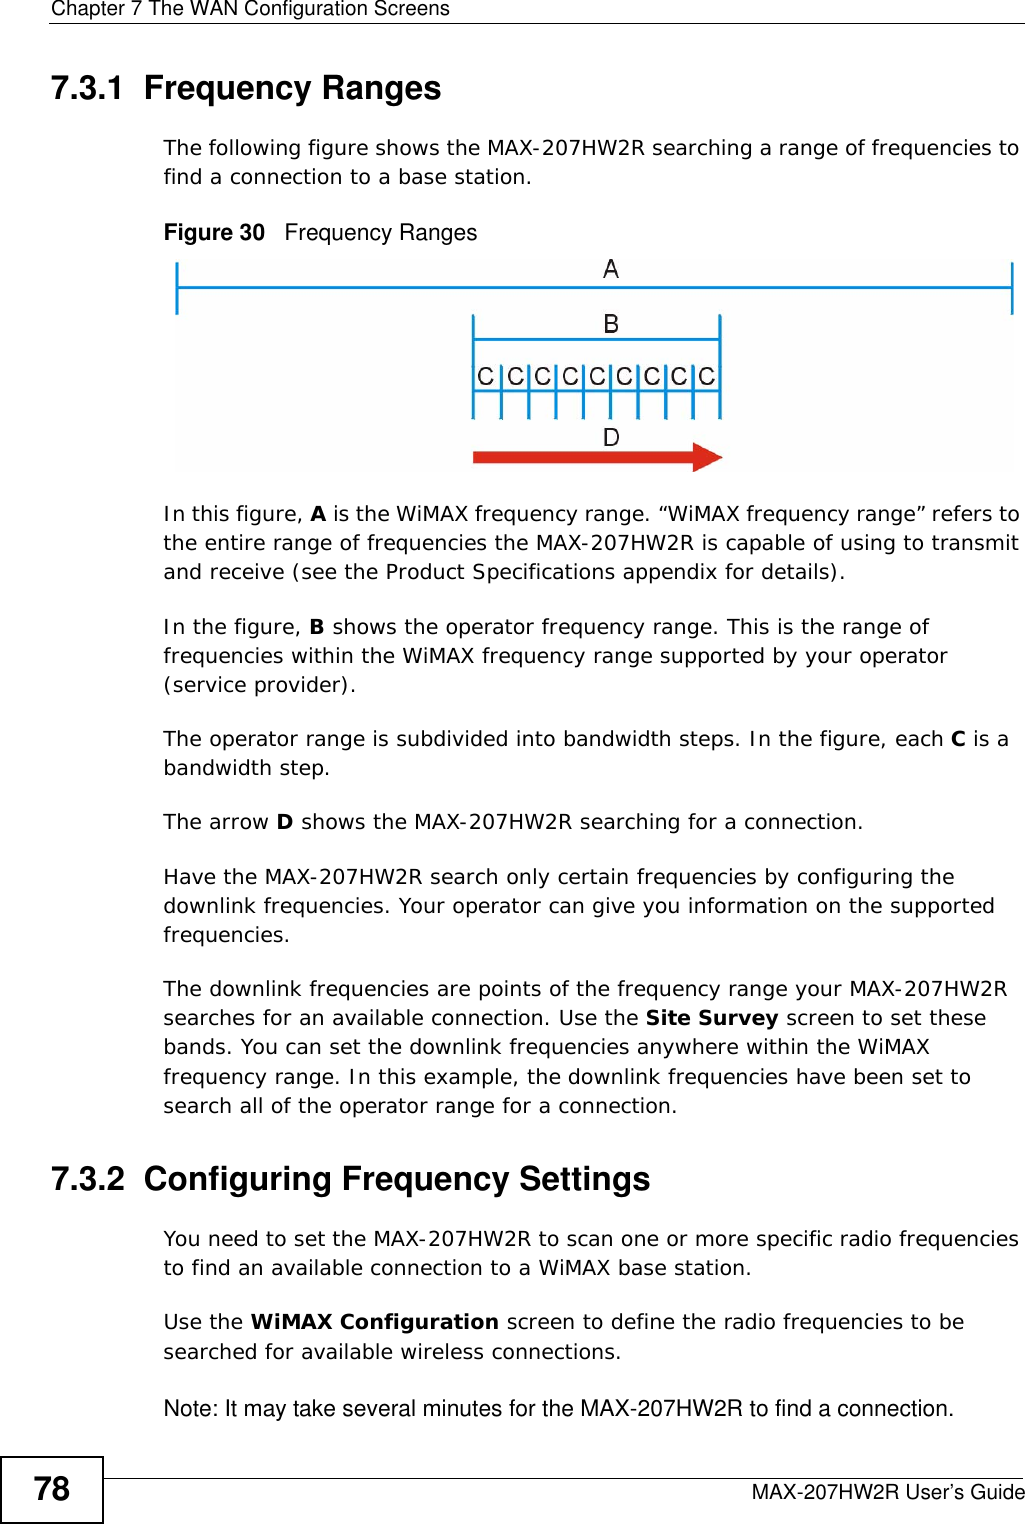 Chapter 7 The WAN Configuration ScreensMAX-207HW2R User’s Guide787.3.1  Frequency RangesThe following figure shows the MAX-207HW2R searching a range of frequencies to find a connection to a base station. Figure 30   Frequency RangesIn this figure, A is the WiMAX frequency range. “WiMAX frequency range” refers to the entire range of frequencies the MAX-207HW2R is capable of using to transmit and receive (see the Product Specifications appendix for details). In the figure, B shows the operator frequency range. This is the range of frequencies within the WiMAX frequency range supported by your operator (service provider).The operator range is subdivided into bandwidth steps. In the figure, each C is a bandwidth step.The arrow D shows the MAX-207HW2R searching for a connection.Have the MAX-207HW2R search only certain frequencies by configuring the downlink frequencies. Your operator can give you information on the supported frequencies. The downlink frequencies are points of the frequency range your MAX-207HW2R searches for an available connection. Use the Site Survey screen to set these bands. You can set the downlink frequencies anywhere within the WiMAX frequency range. In this example, the downlink frequencies have been set to search all of the operator range for a connection.7.3.2  Configuring Frequency SettingsYou need to set the MAX-207HW2R to scan one or more specific radio frequencies to find an available connection to a WiMAX base station. Use the WiMAX Configuration screen to define the radio frequencies to be searched for available wireless connections. Note: It may take several minutes for the MAX-207HW2R to find a connection.